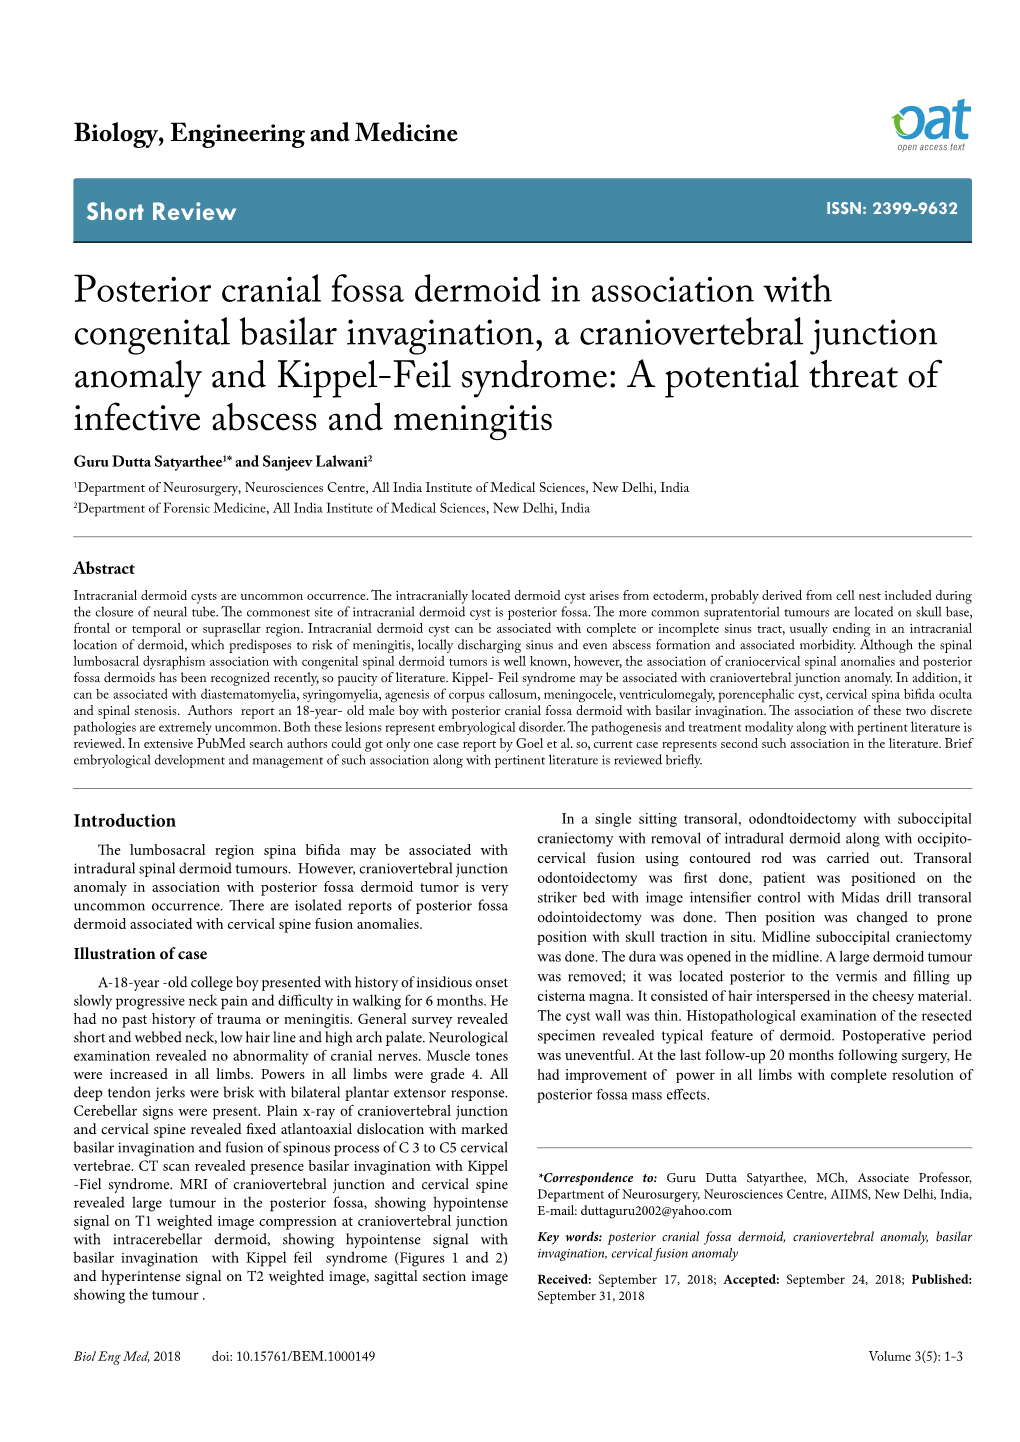 Posterior Cranial Fossa Dermoid in Association With